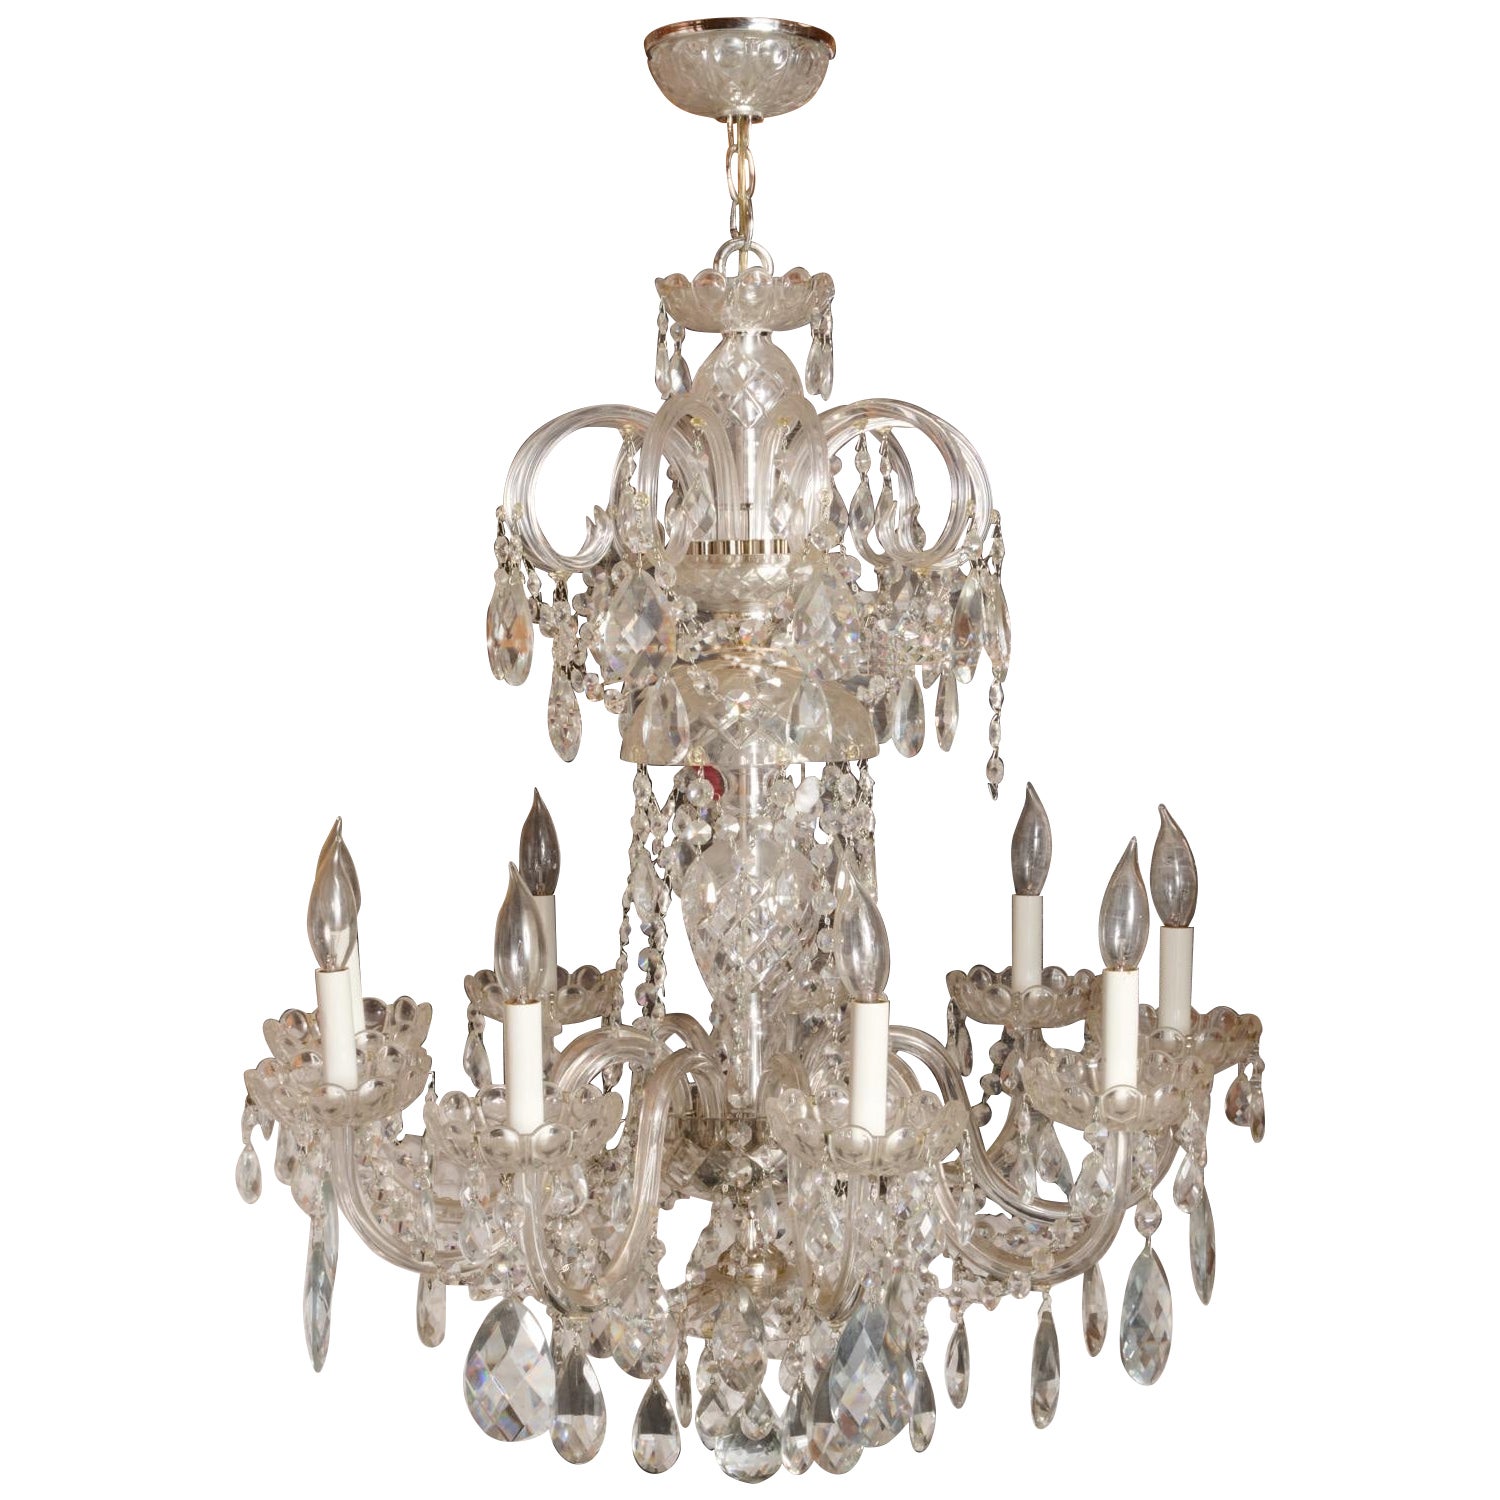  20th C. Baccarat Style Nine Light Chandelier With Scrolled Glass Arms 